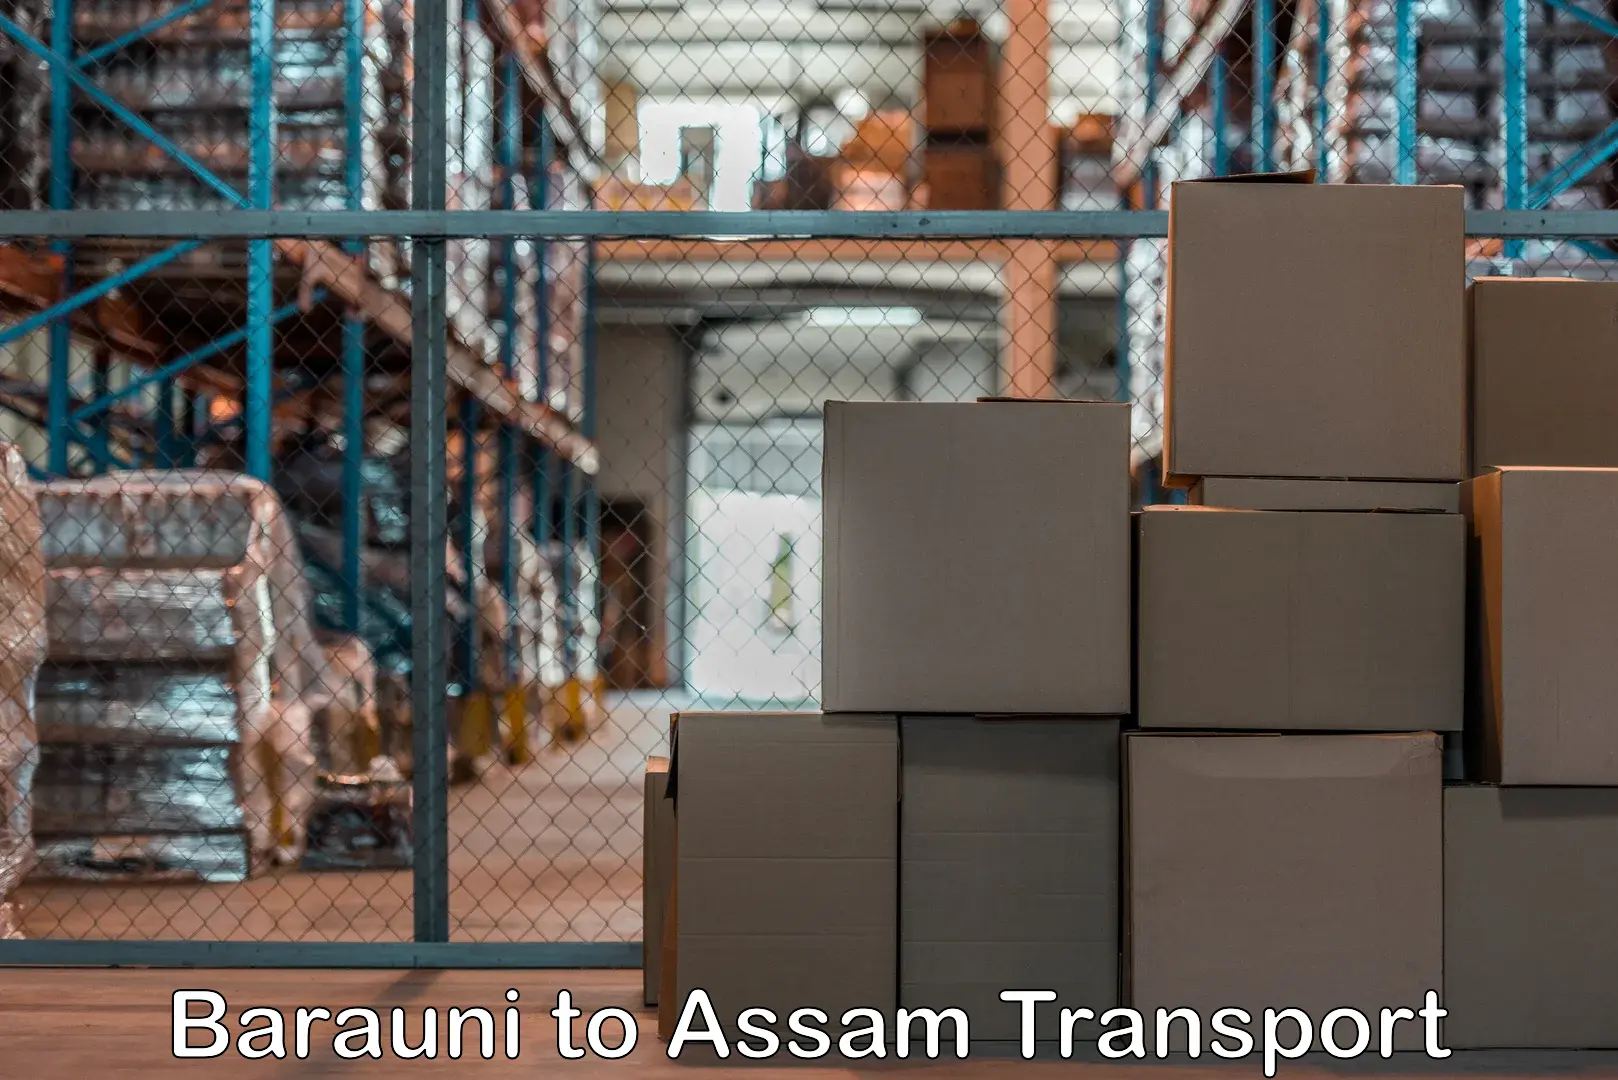 Transport bike from one state to another Barauni to Assam